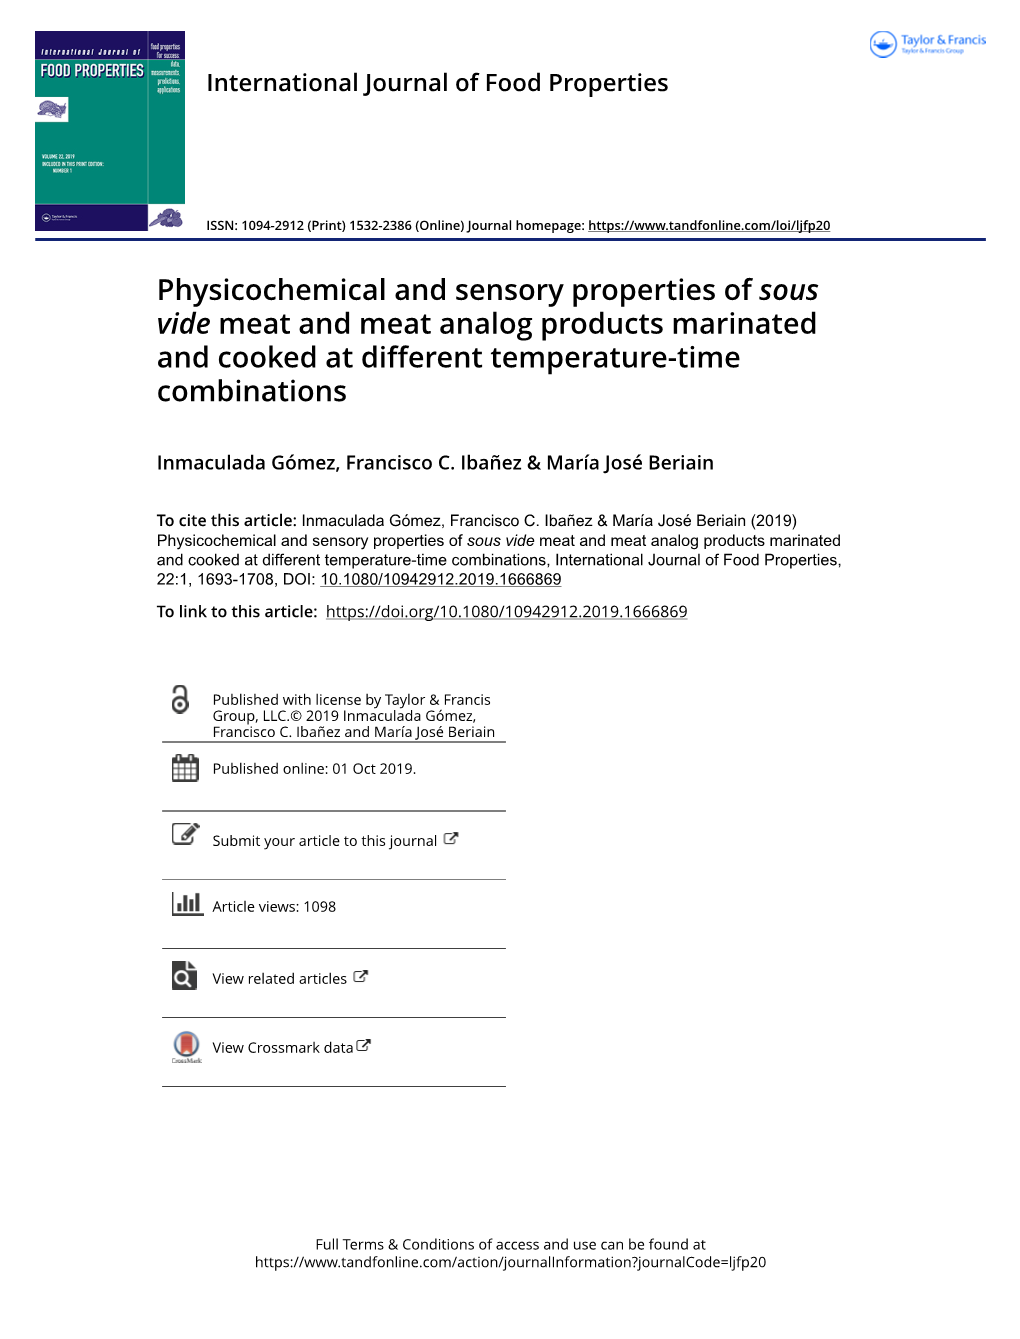 Physicochemical and Sensory Properties of Sous Vide Meat and Meat Analog Products Marinated and Cooked at Different Temperature-Time Combinations